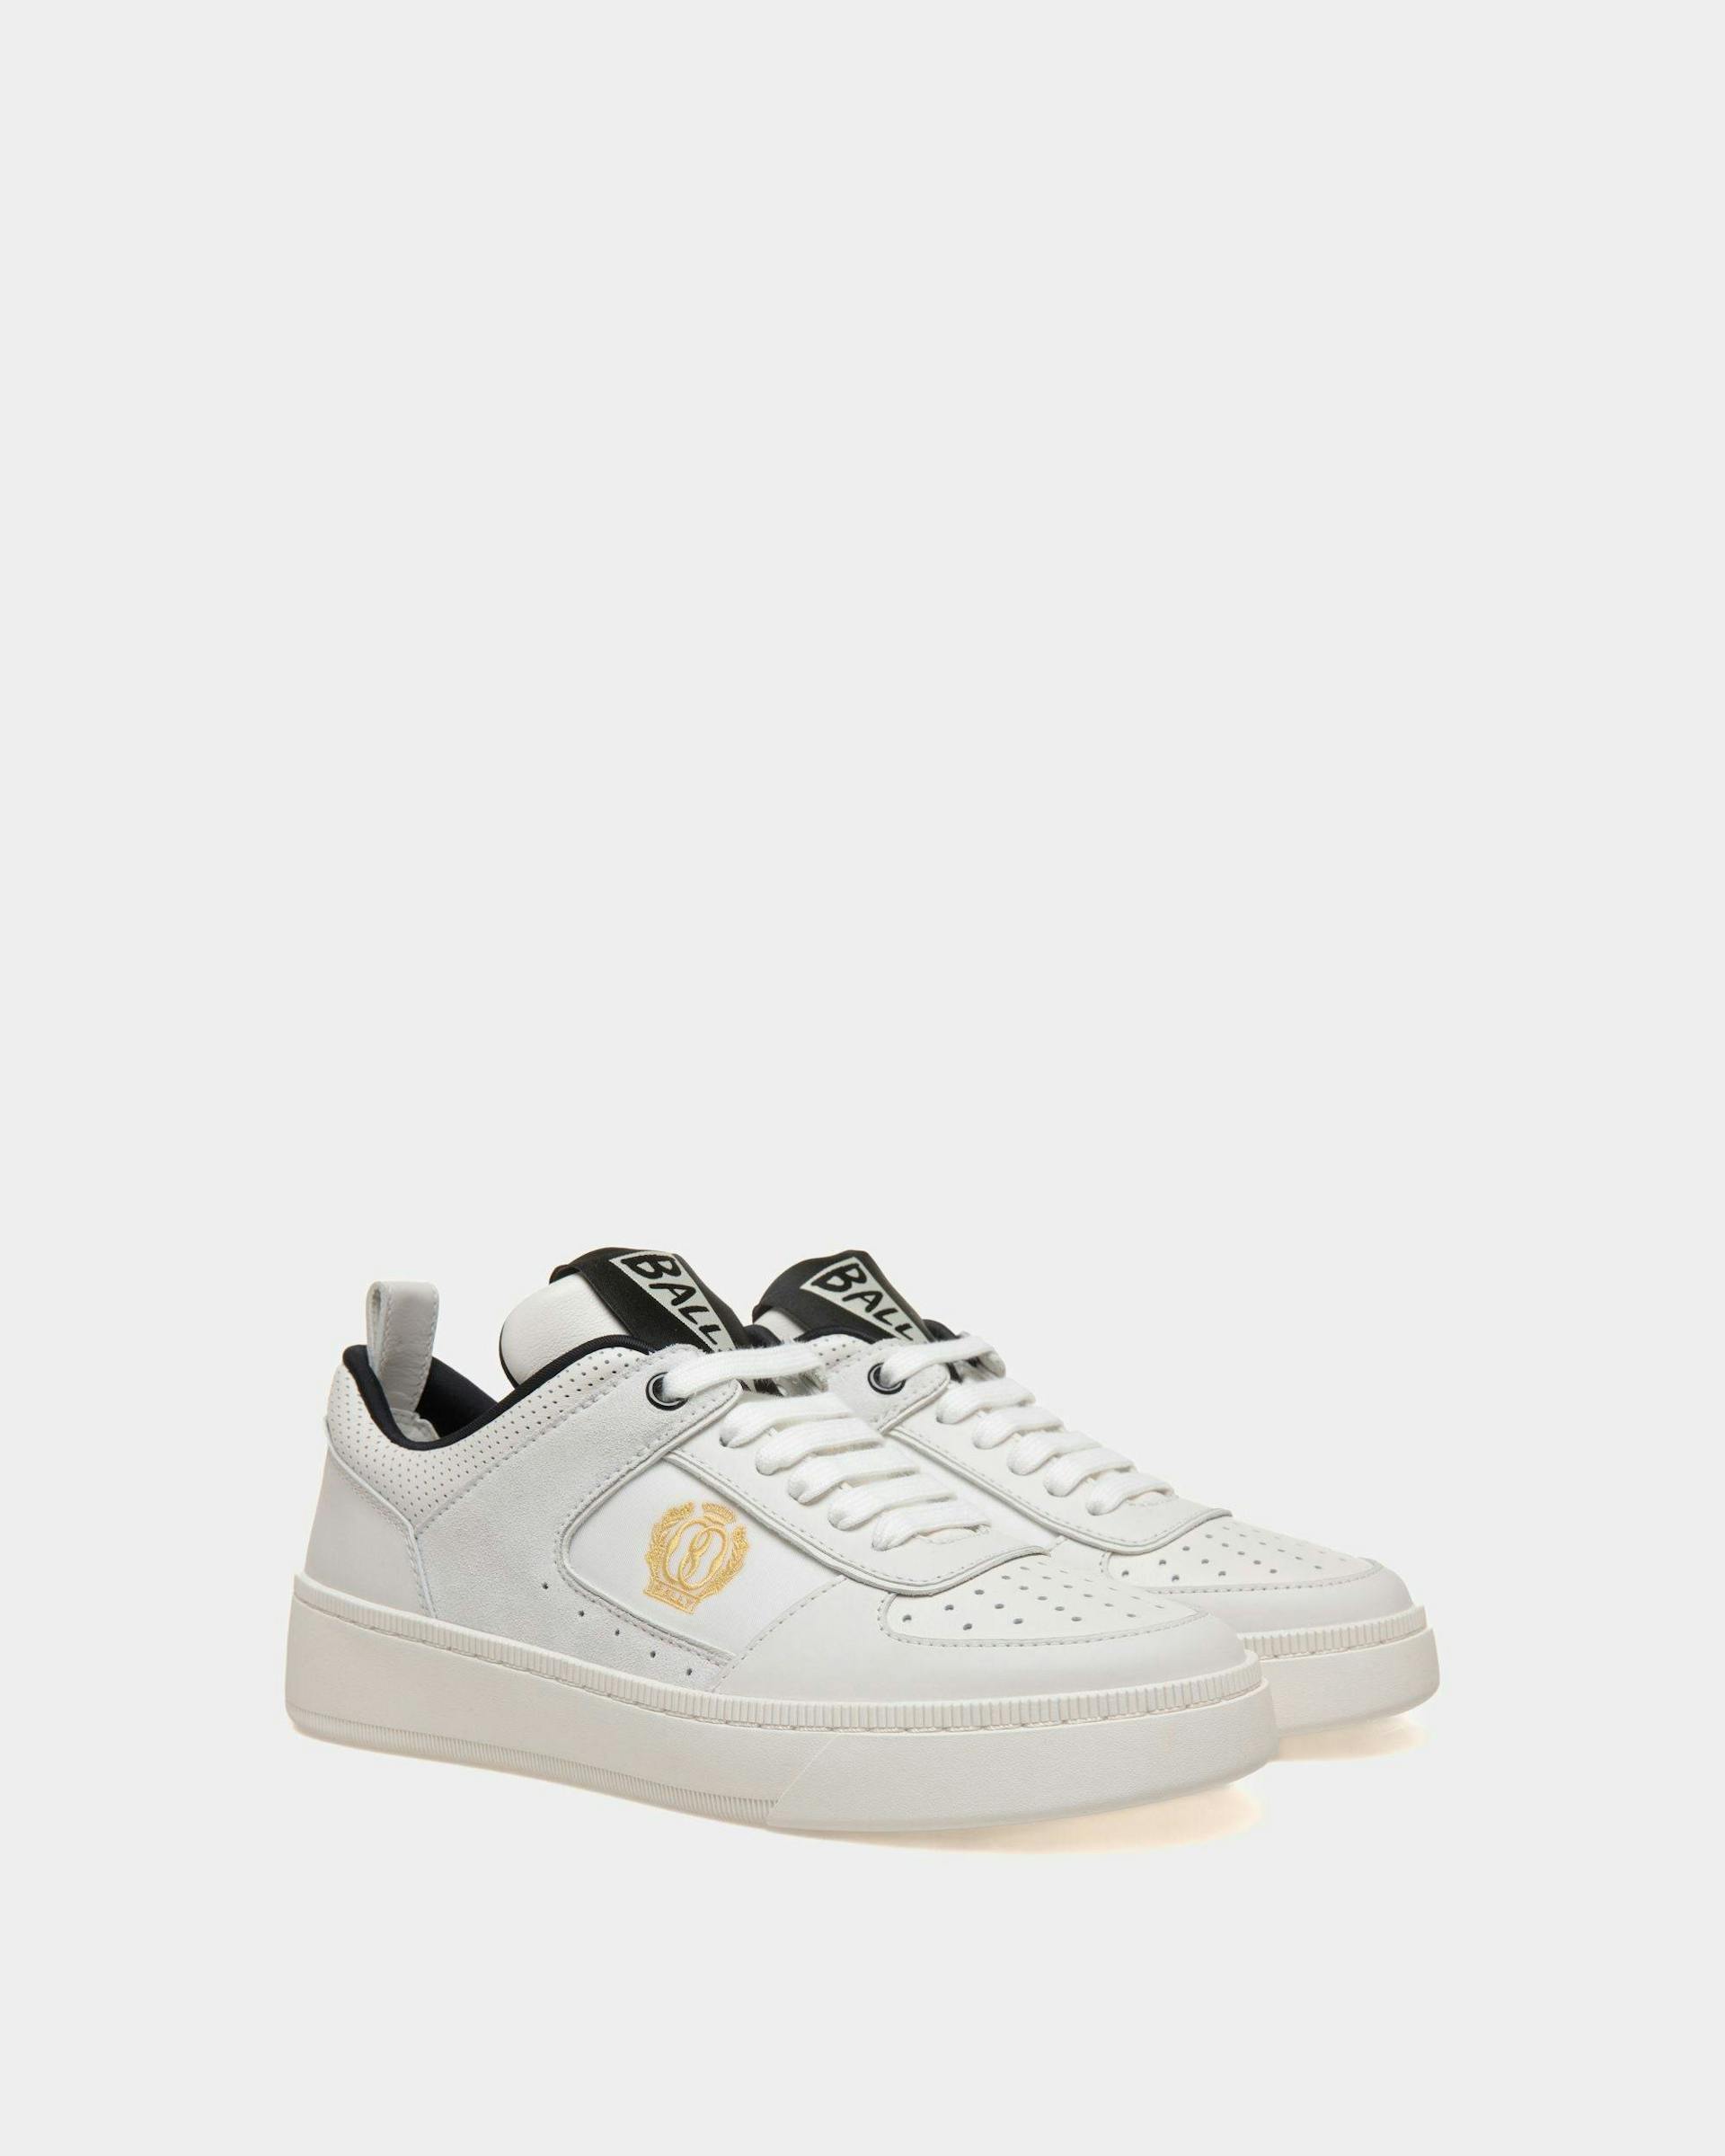 Women's Raise Sneaker In White And Black Leather | Bally | Still Life 3/4 Front